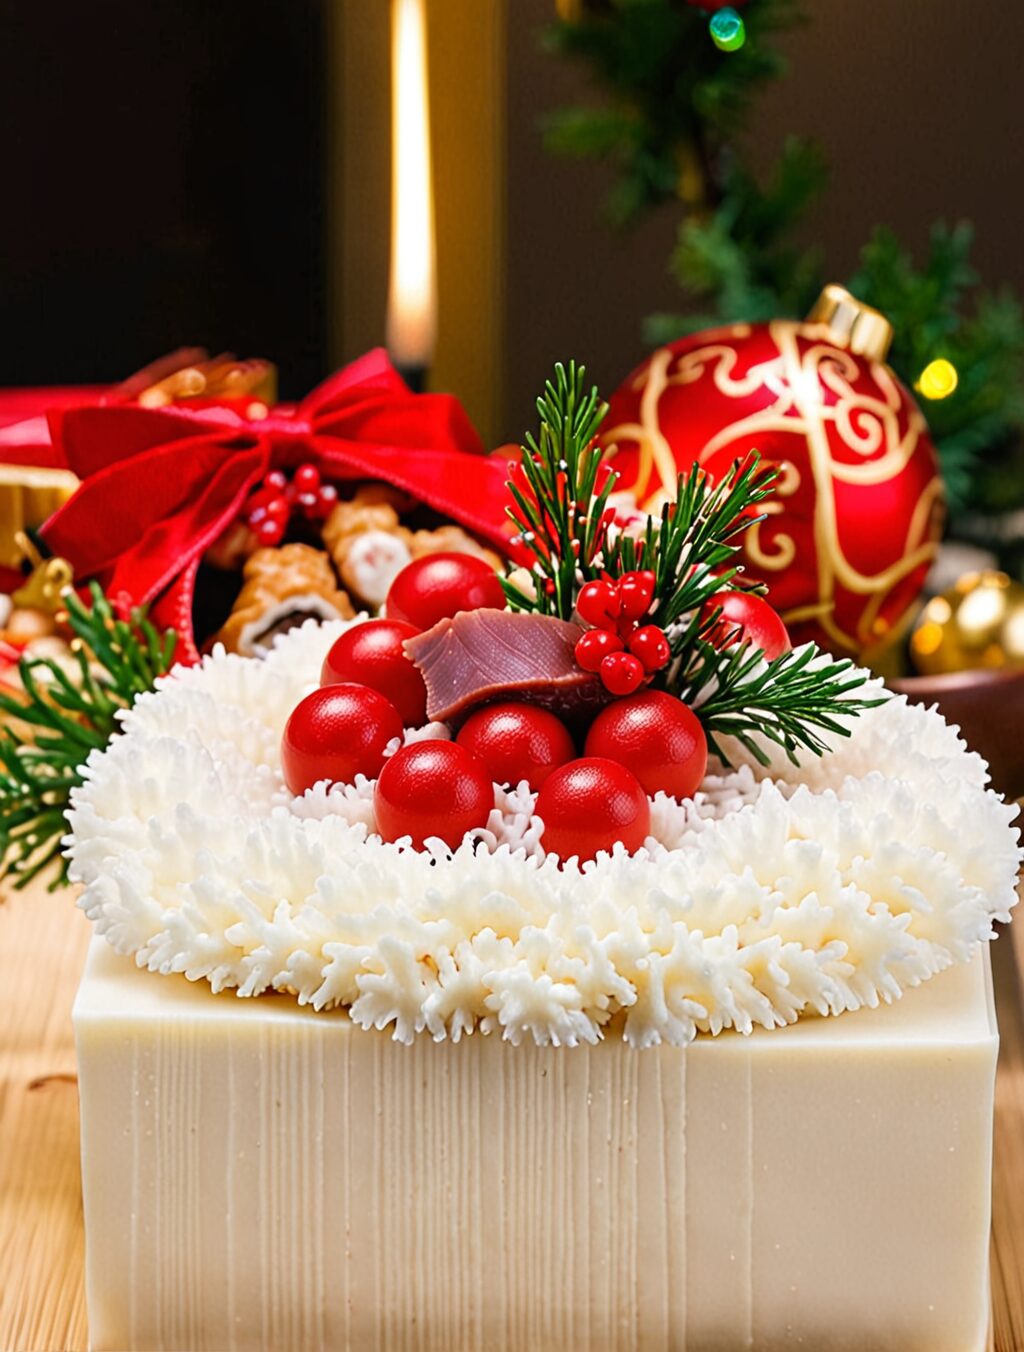 what does japan eat at christmas